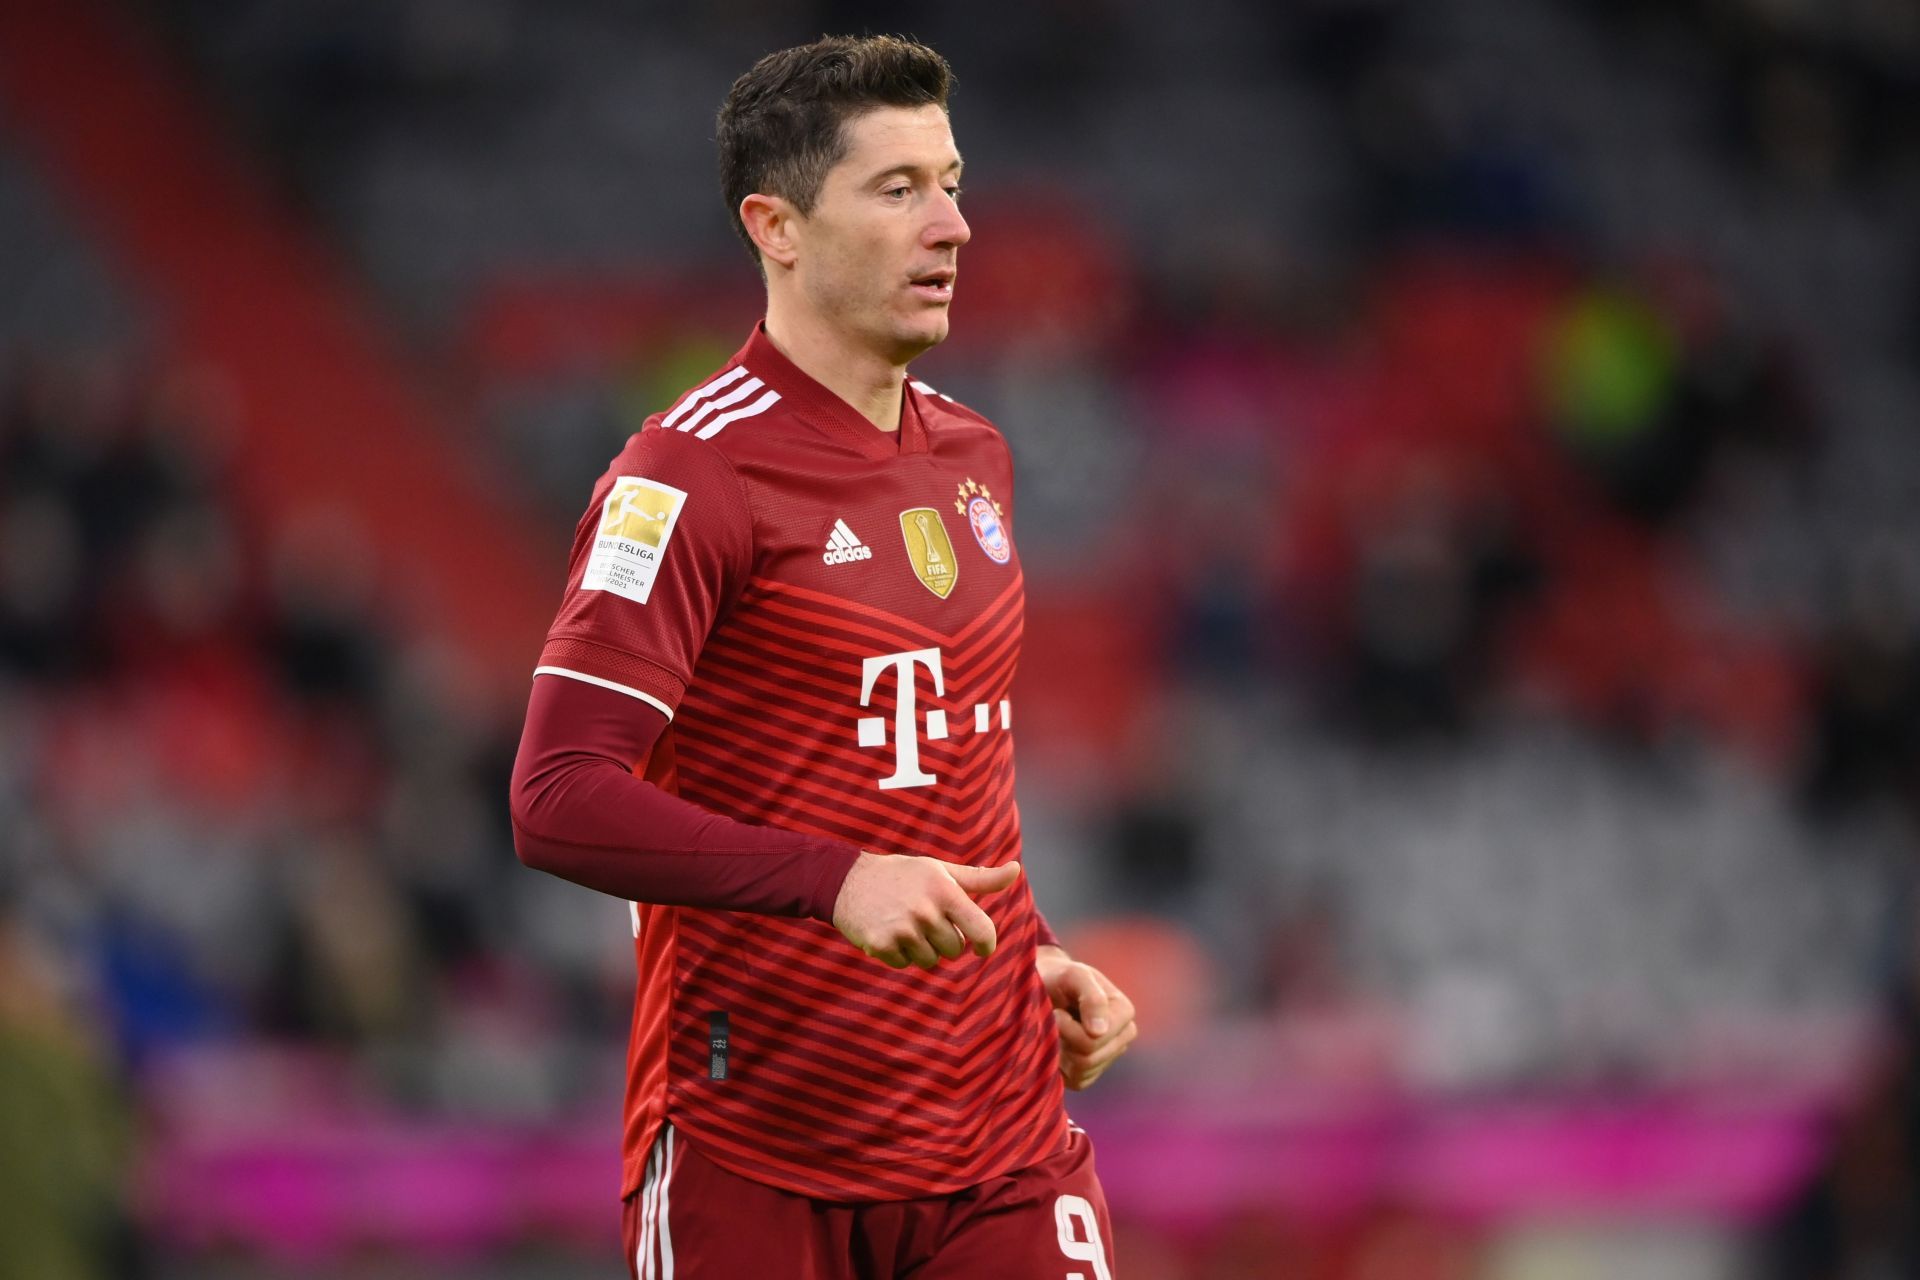 Lewandowski was named Striker of the Year after his incredible year with Bayern Munich